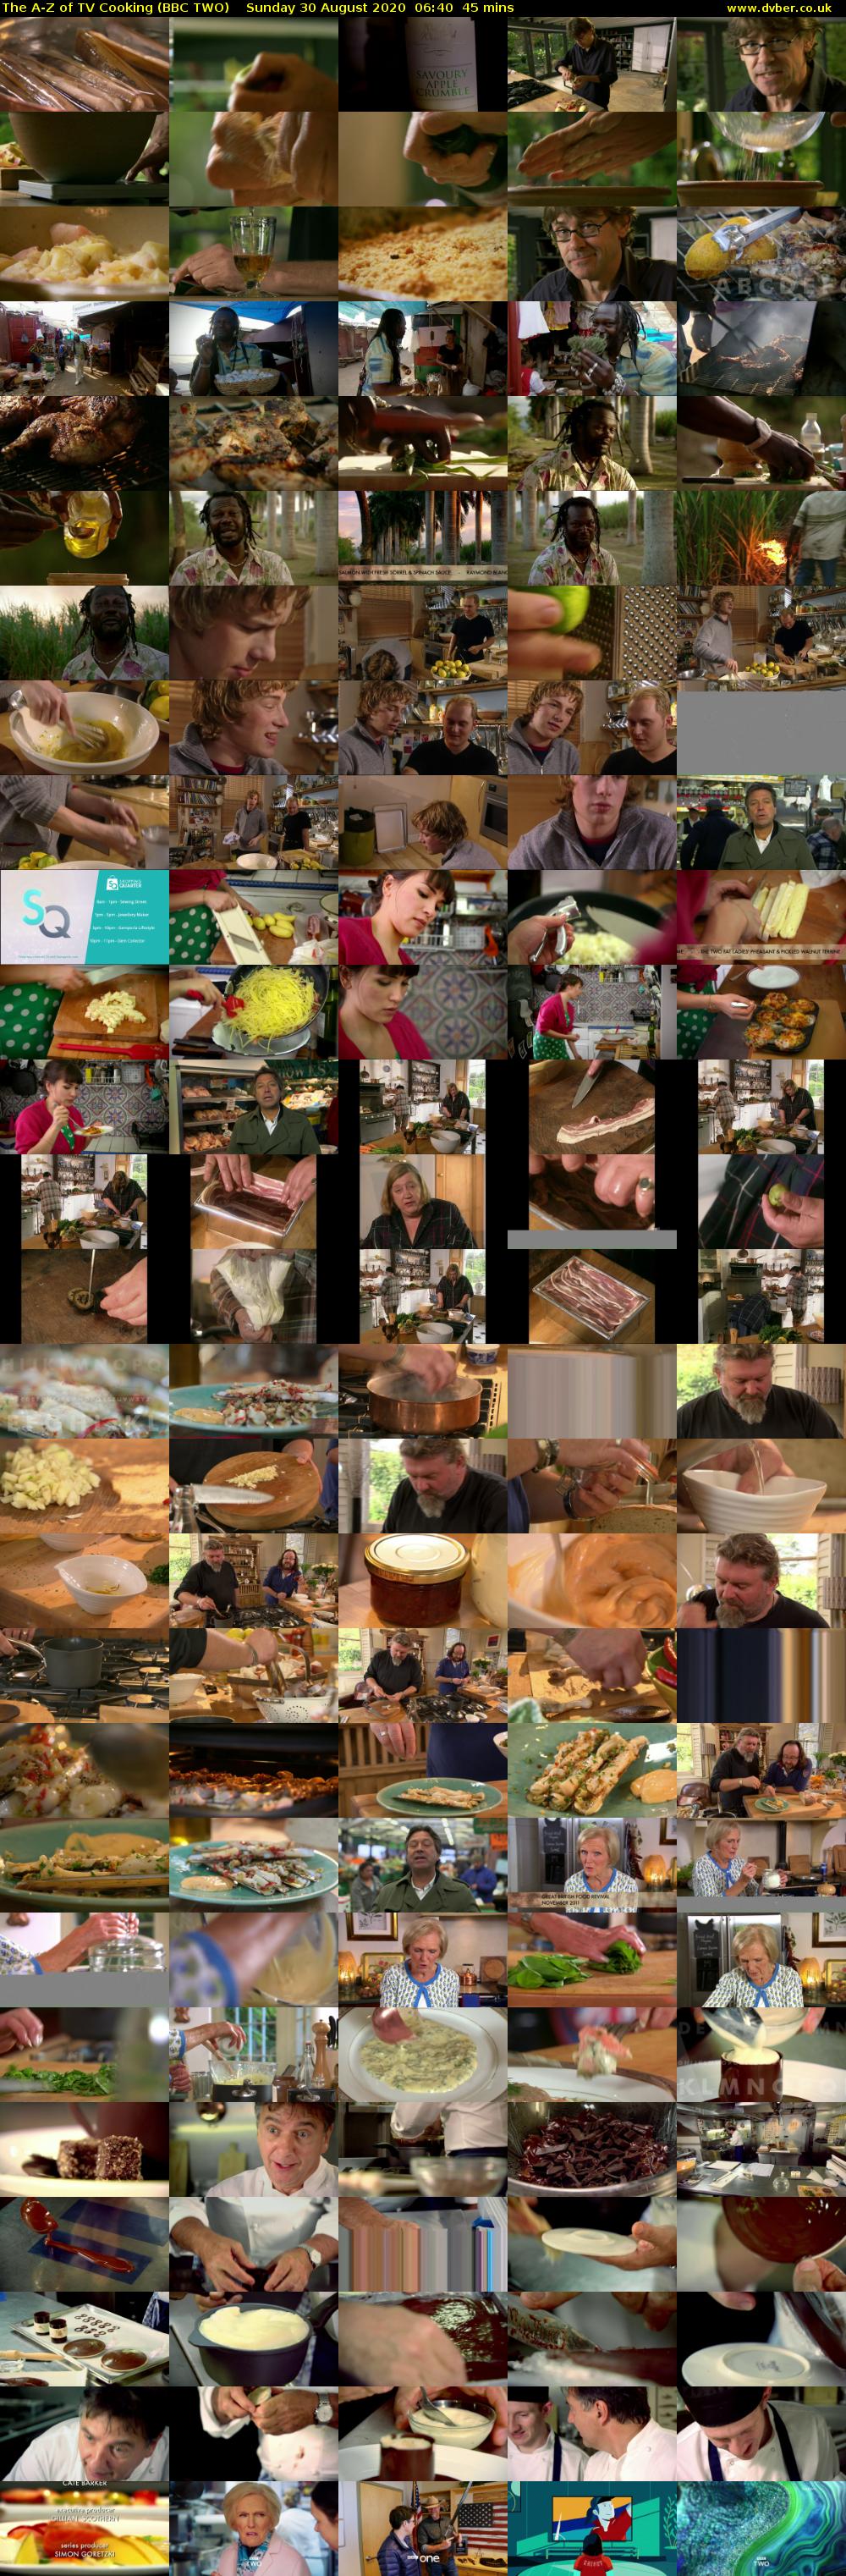 The A-Z of TV Cooking (BBC TWO) Sunday 30 August 2020 06:40 - 07:25